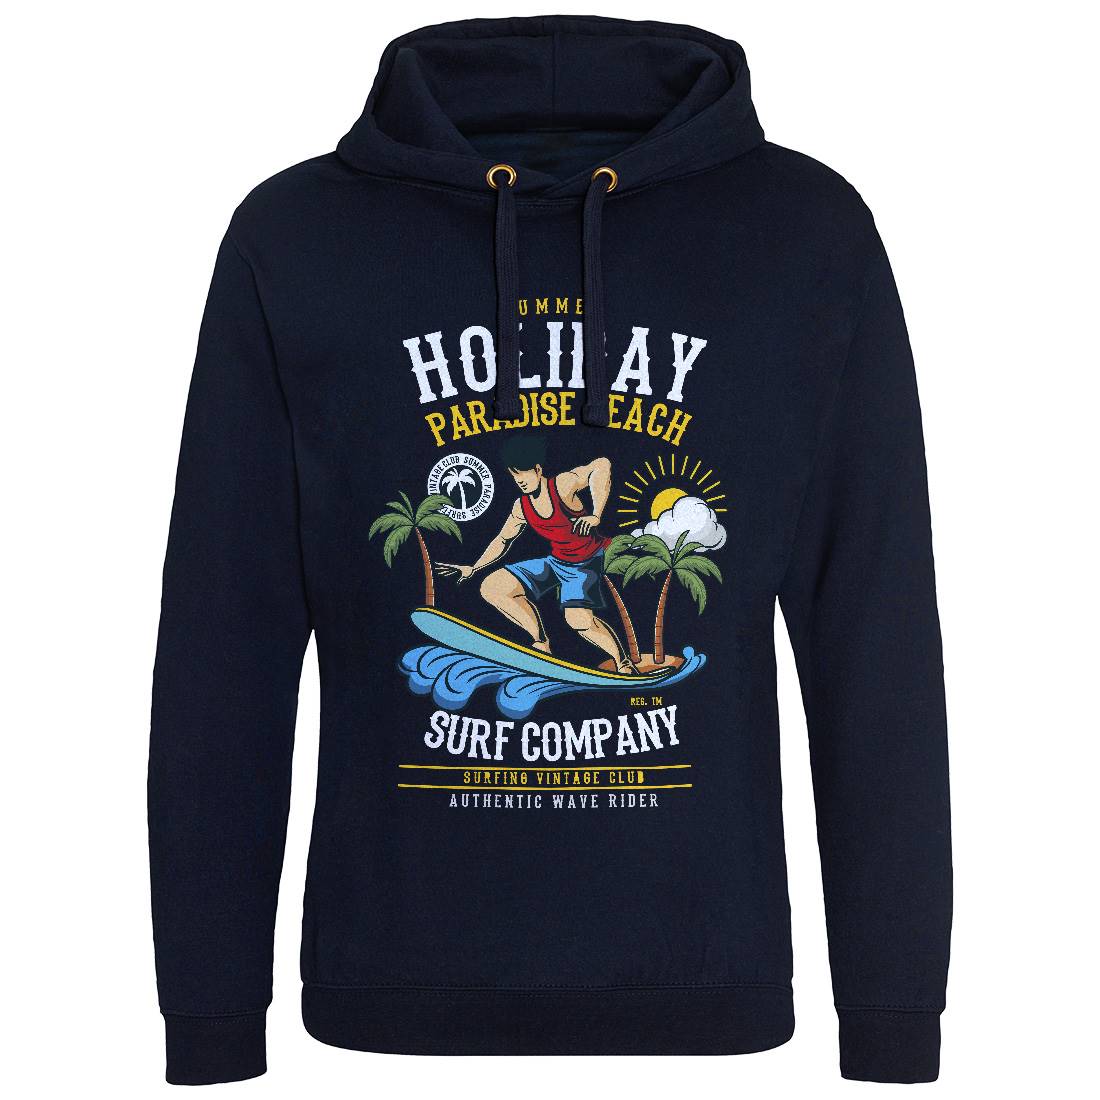 Summer Holiday Mens Hoodie Without Pocket Surf C457